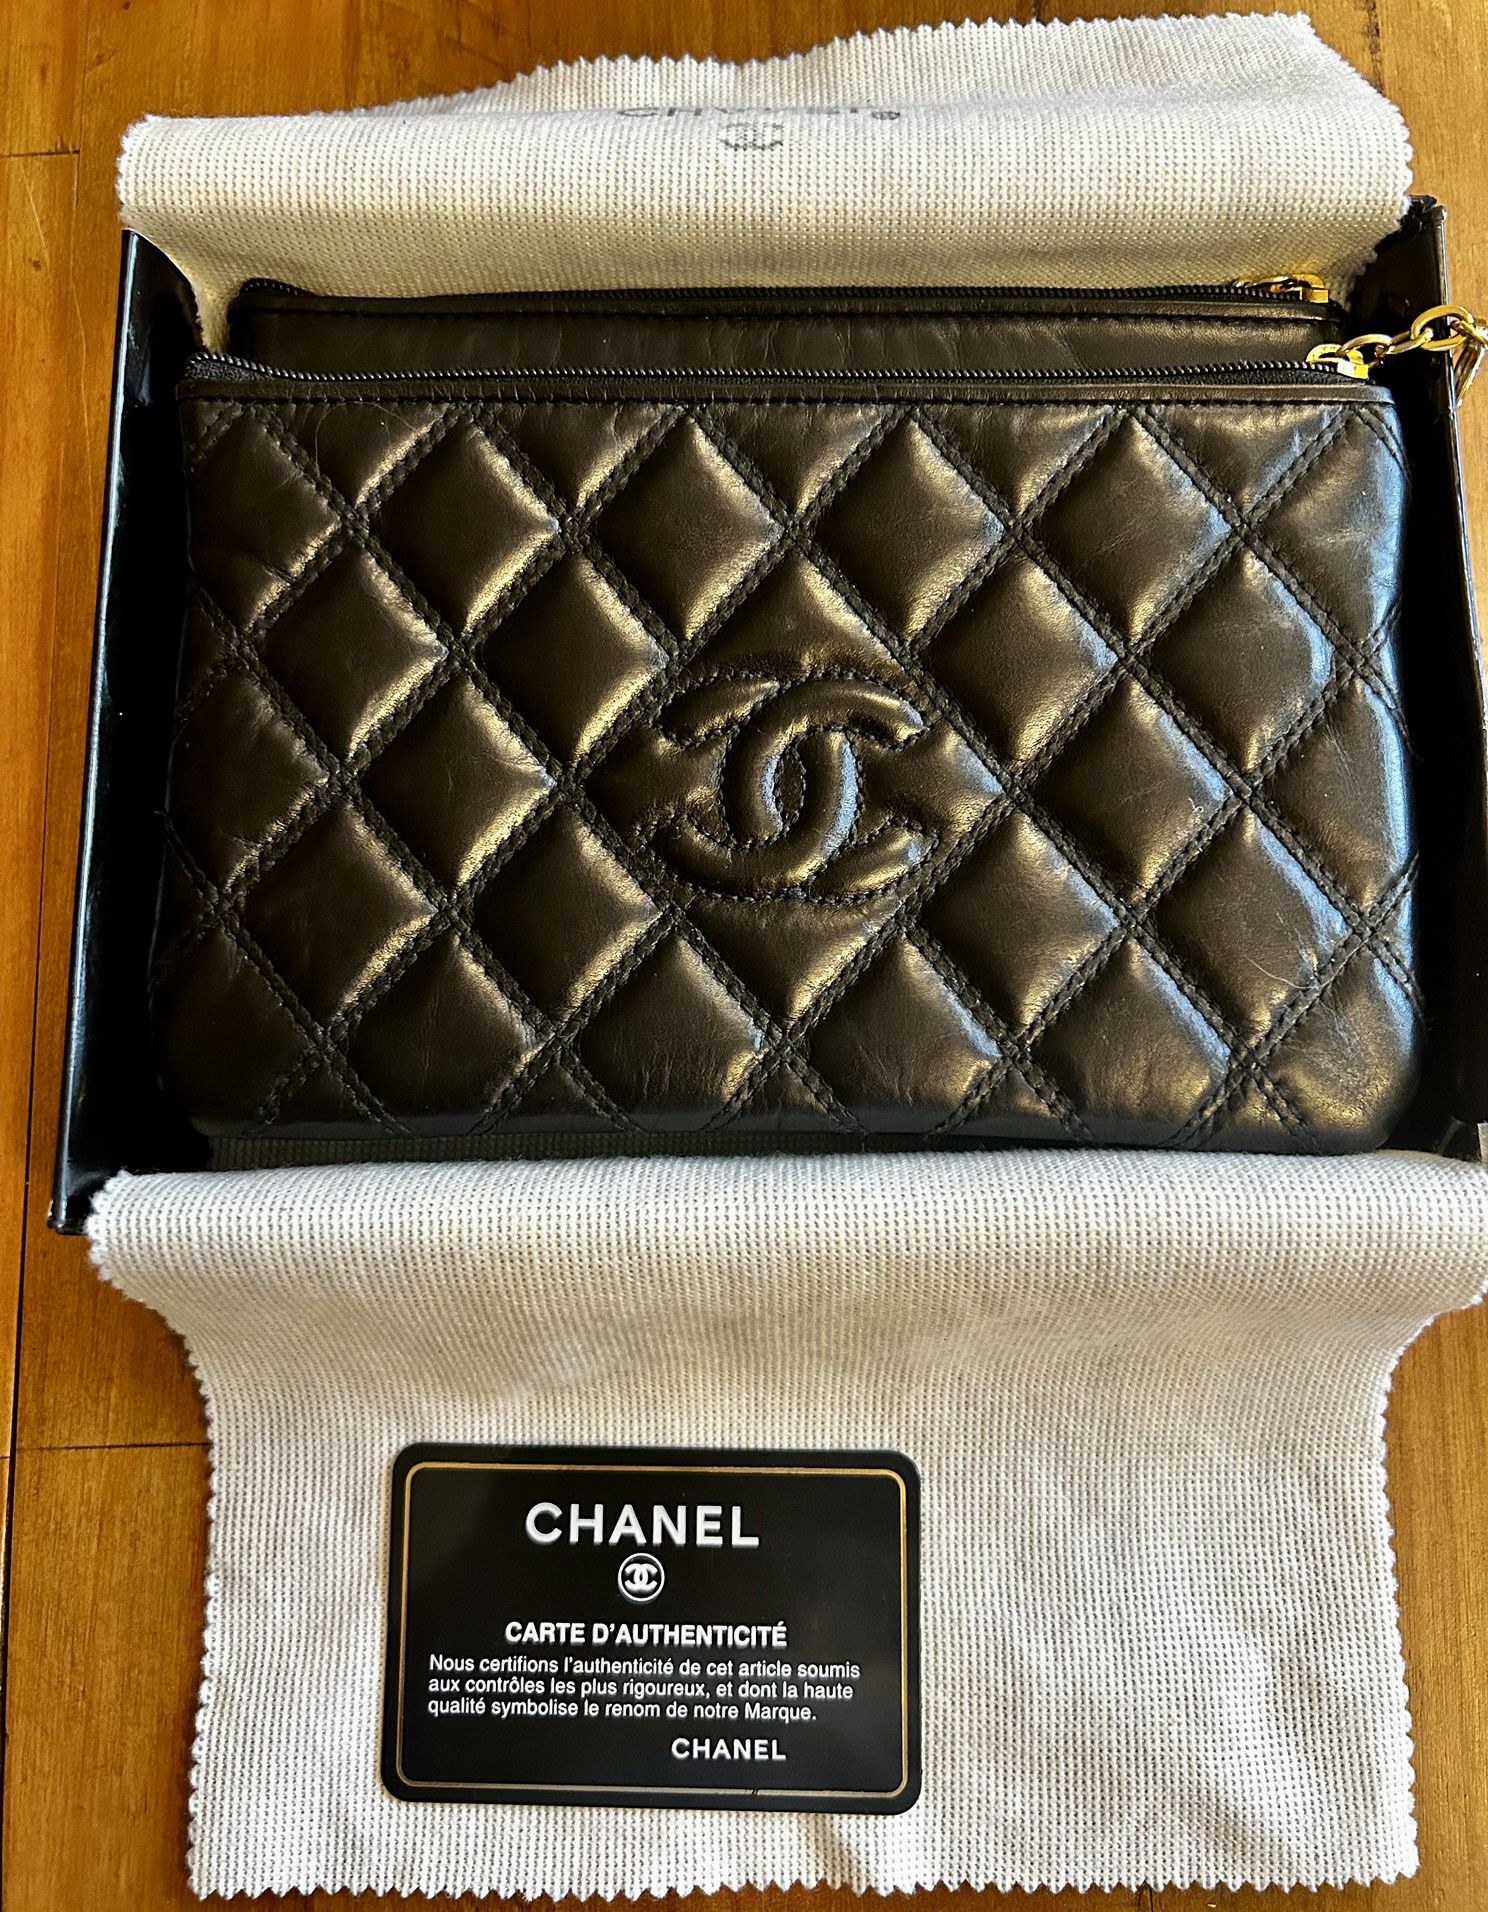 Vintage Chanel Clutch, Very Good Condition Black Quilted Lambskin Series 4 Certified Authentic, Rare Find